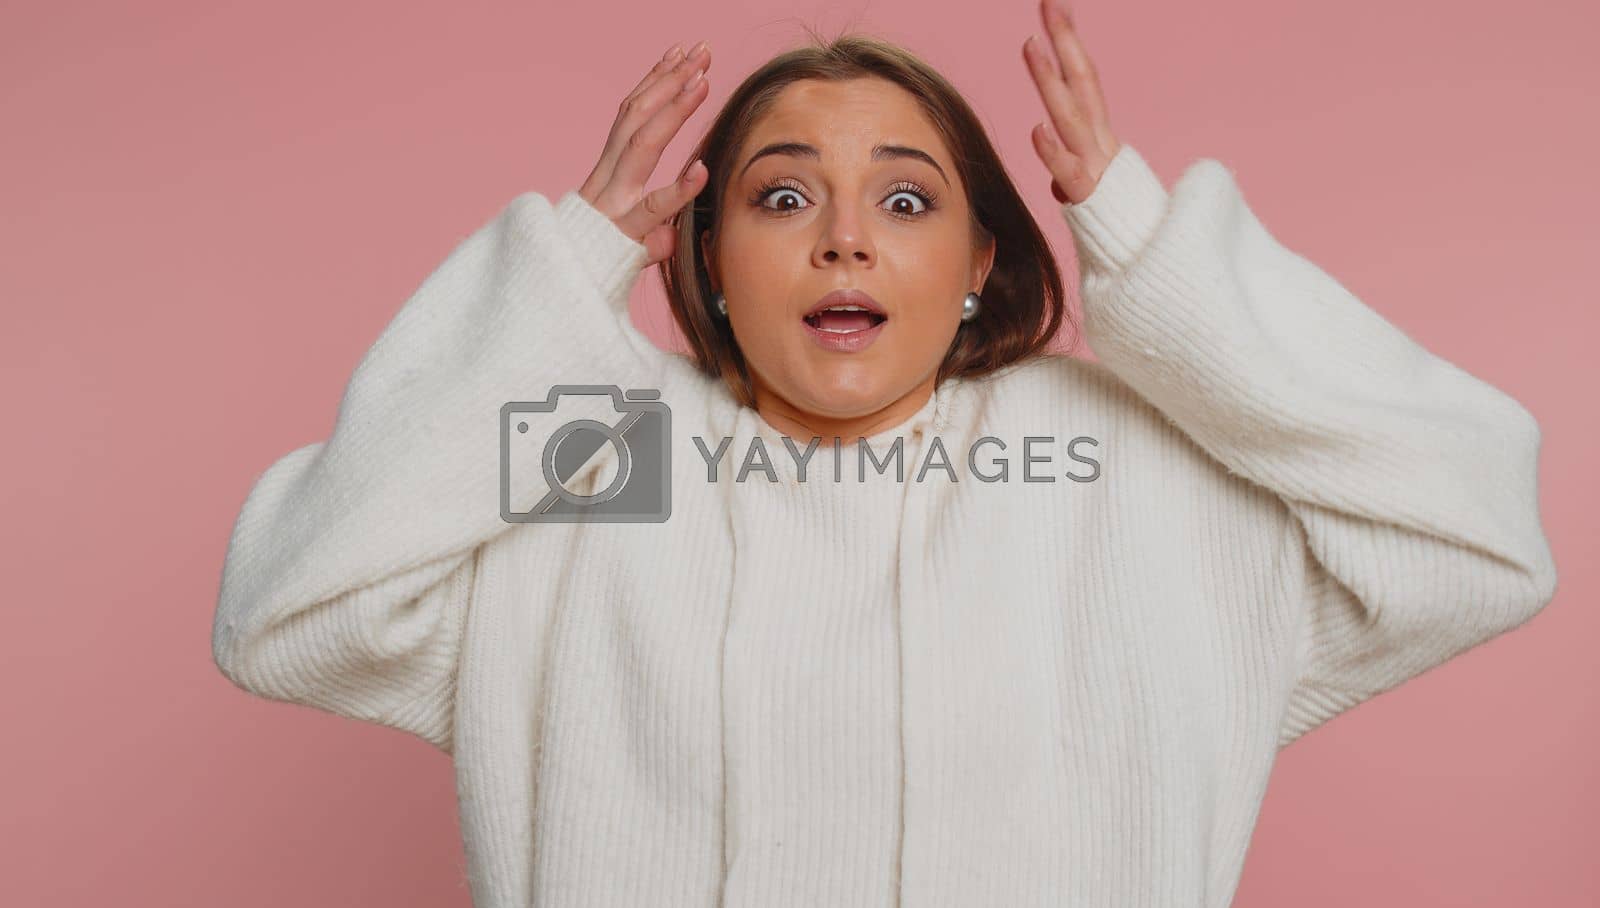 Royalty free image of Excited amazed woman surprise looking at camera with big eyes, shocked by sudden victory wow emotion by efuror